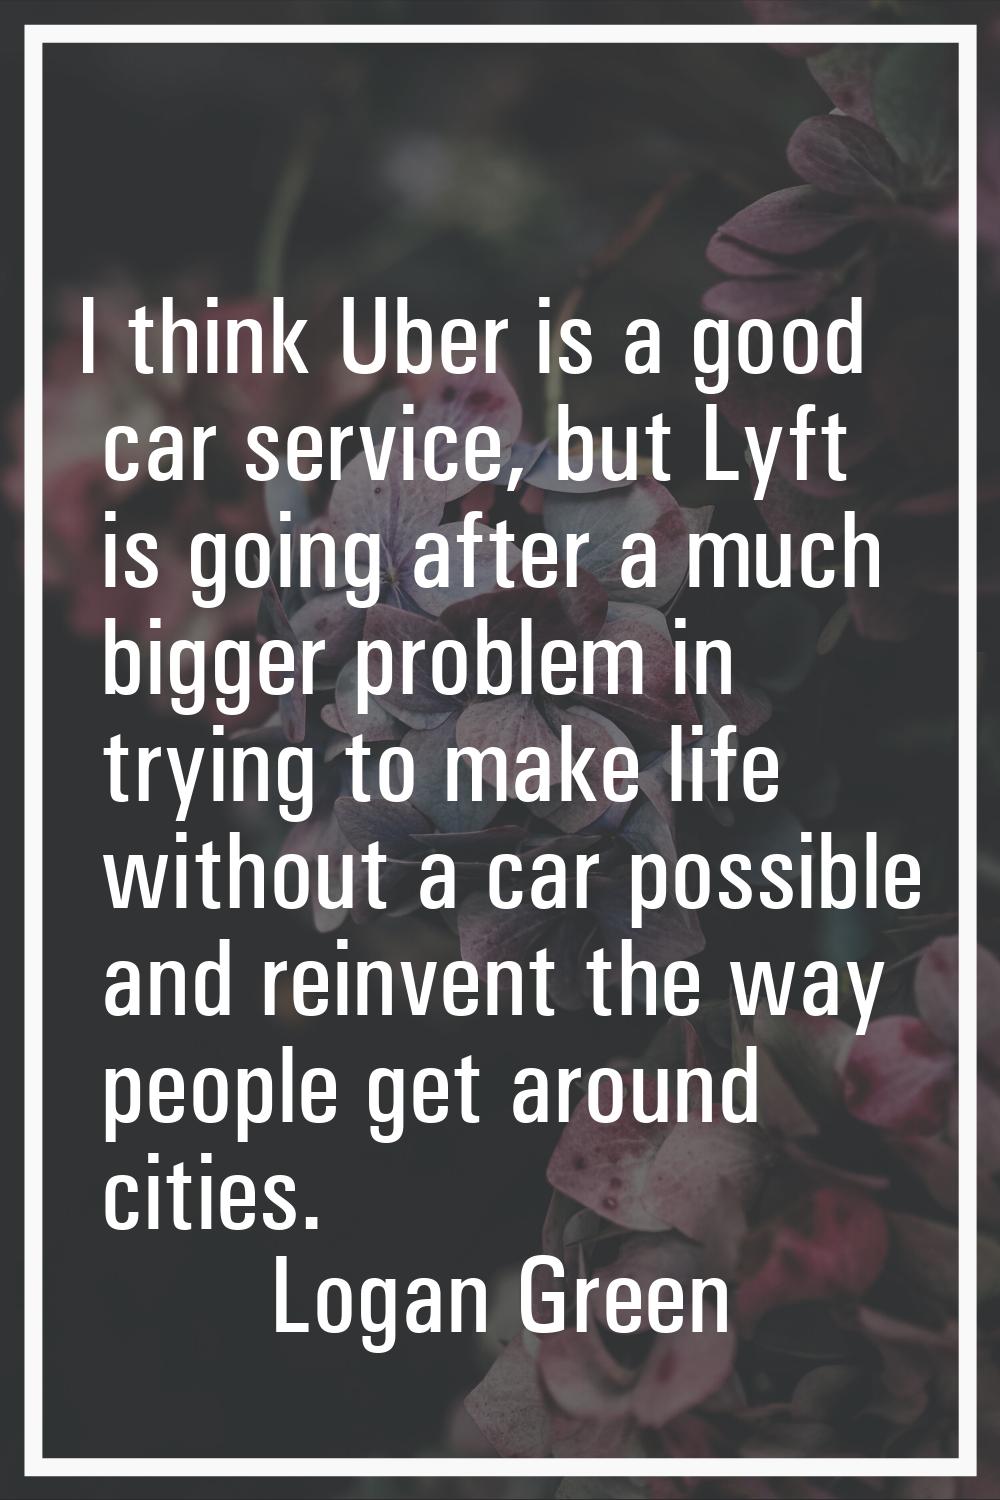 I think Uber is a good car service, but Lyft is going after a much bigger problem in trying to make